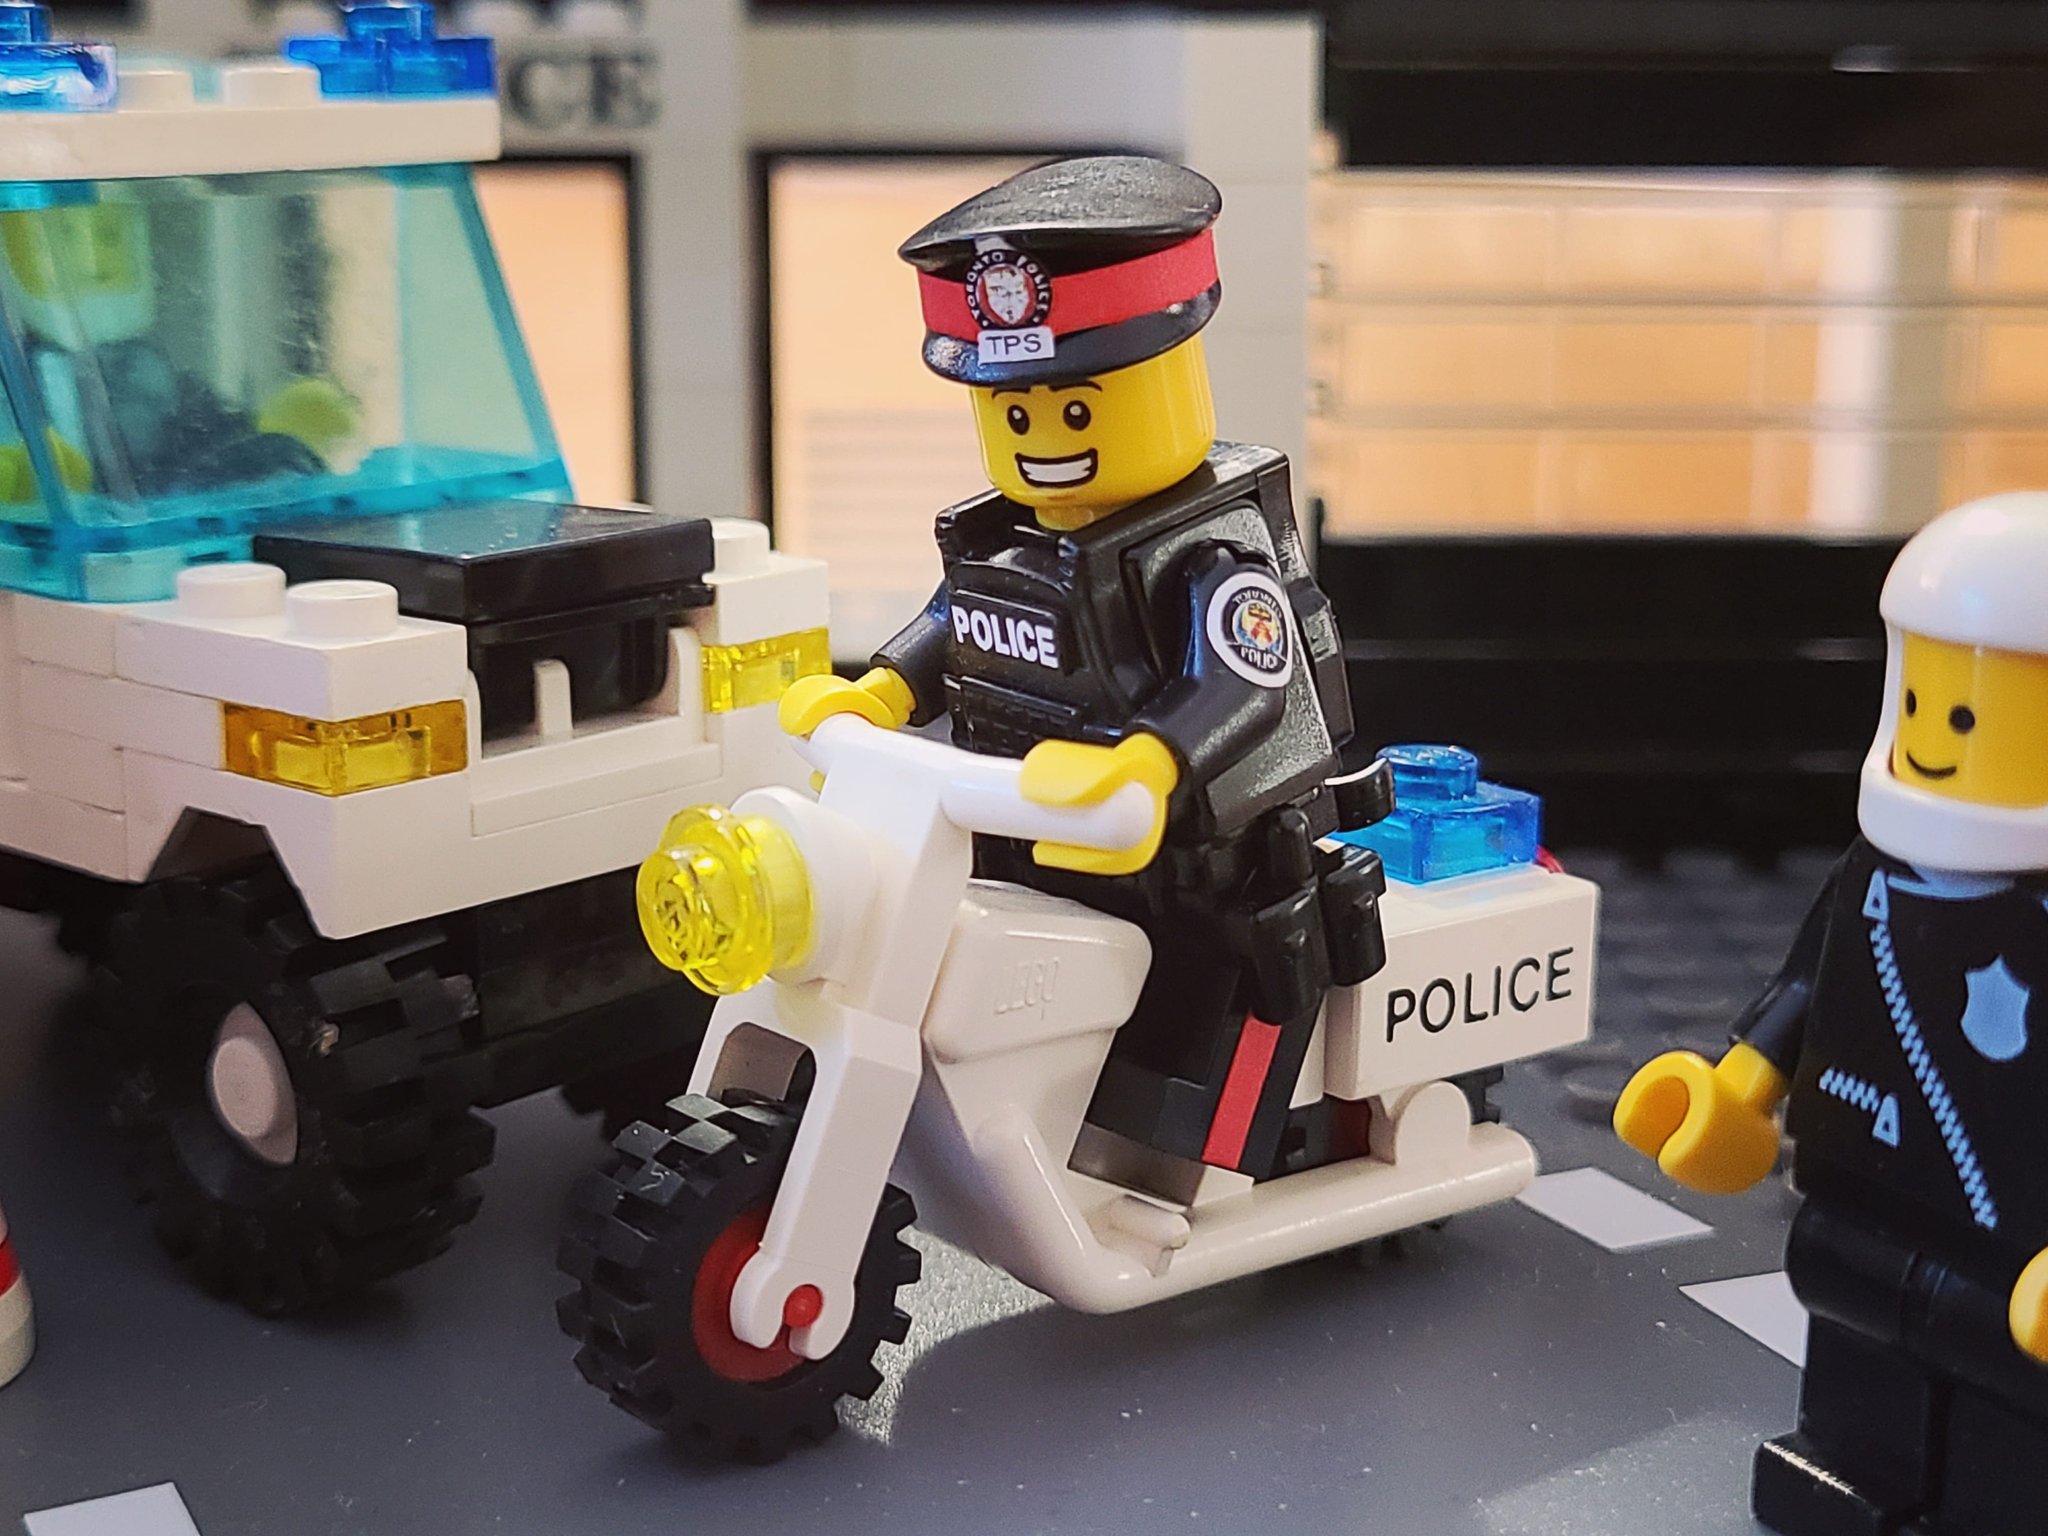 Lego Cop in GTA Twitter: "Anyone remember these #LEGO police vehicles? It's over 30 years old and they are unmodified, should qualify for the #historic plates! 🚙 #police #legocop https://t.co/0H5mu2KNjK" /